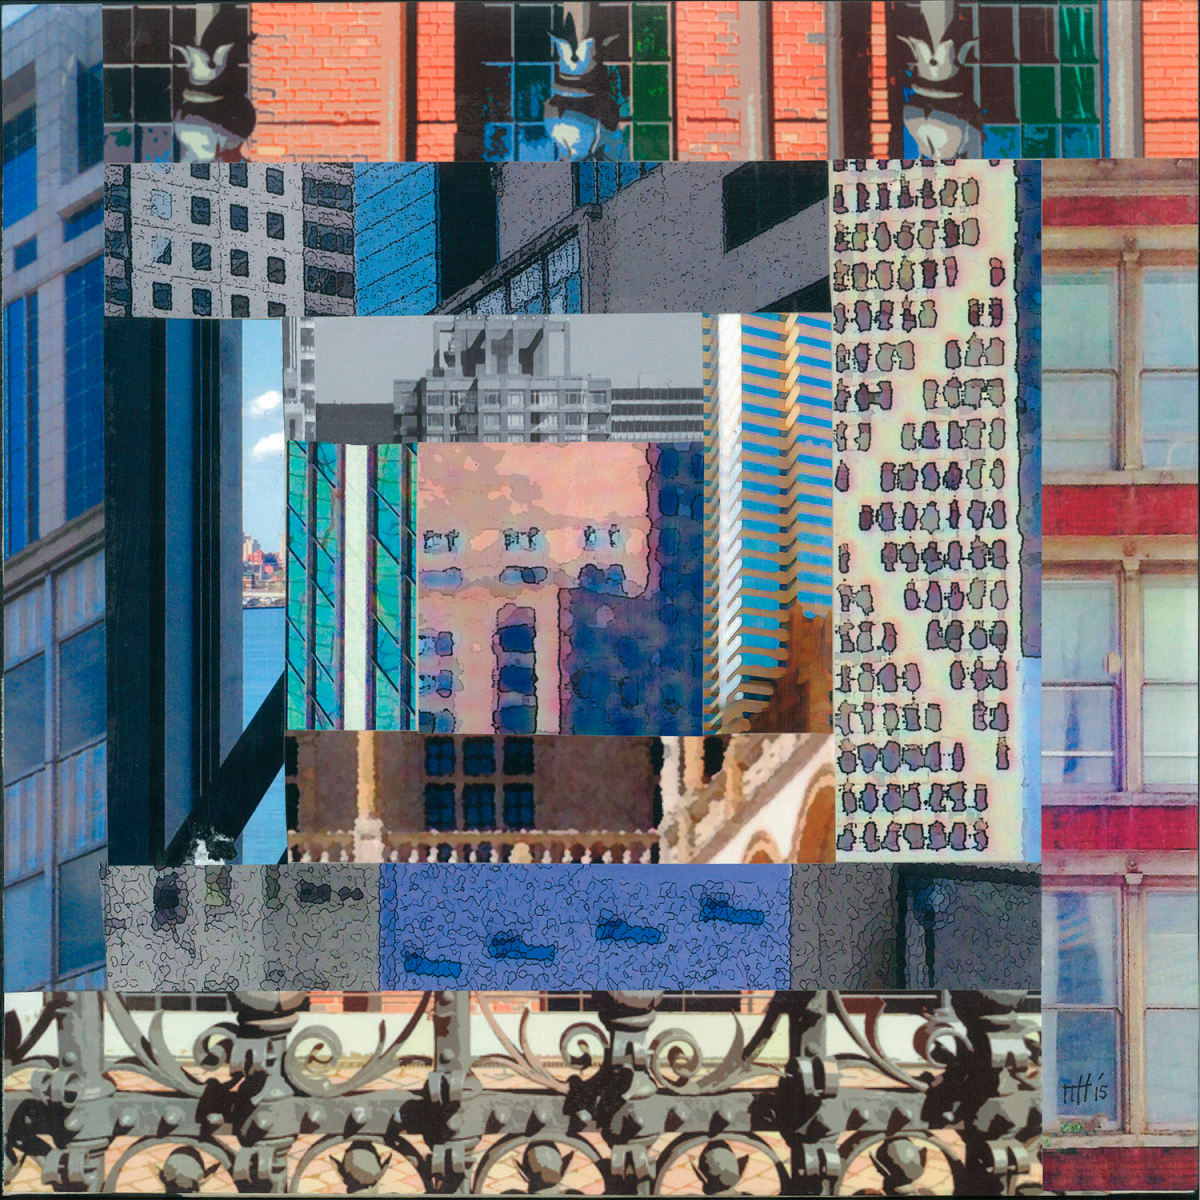 Patchwork City 3 by Marilyn Henrion  Image: Patchwork City 3